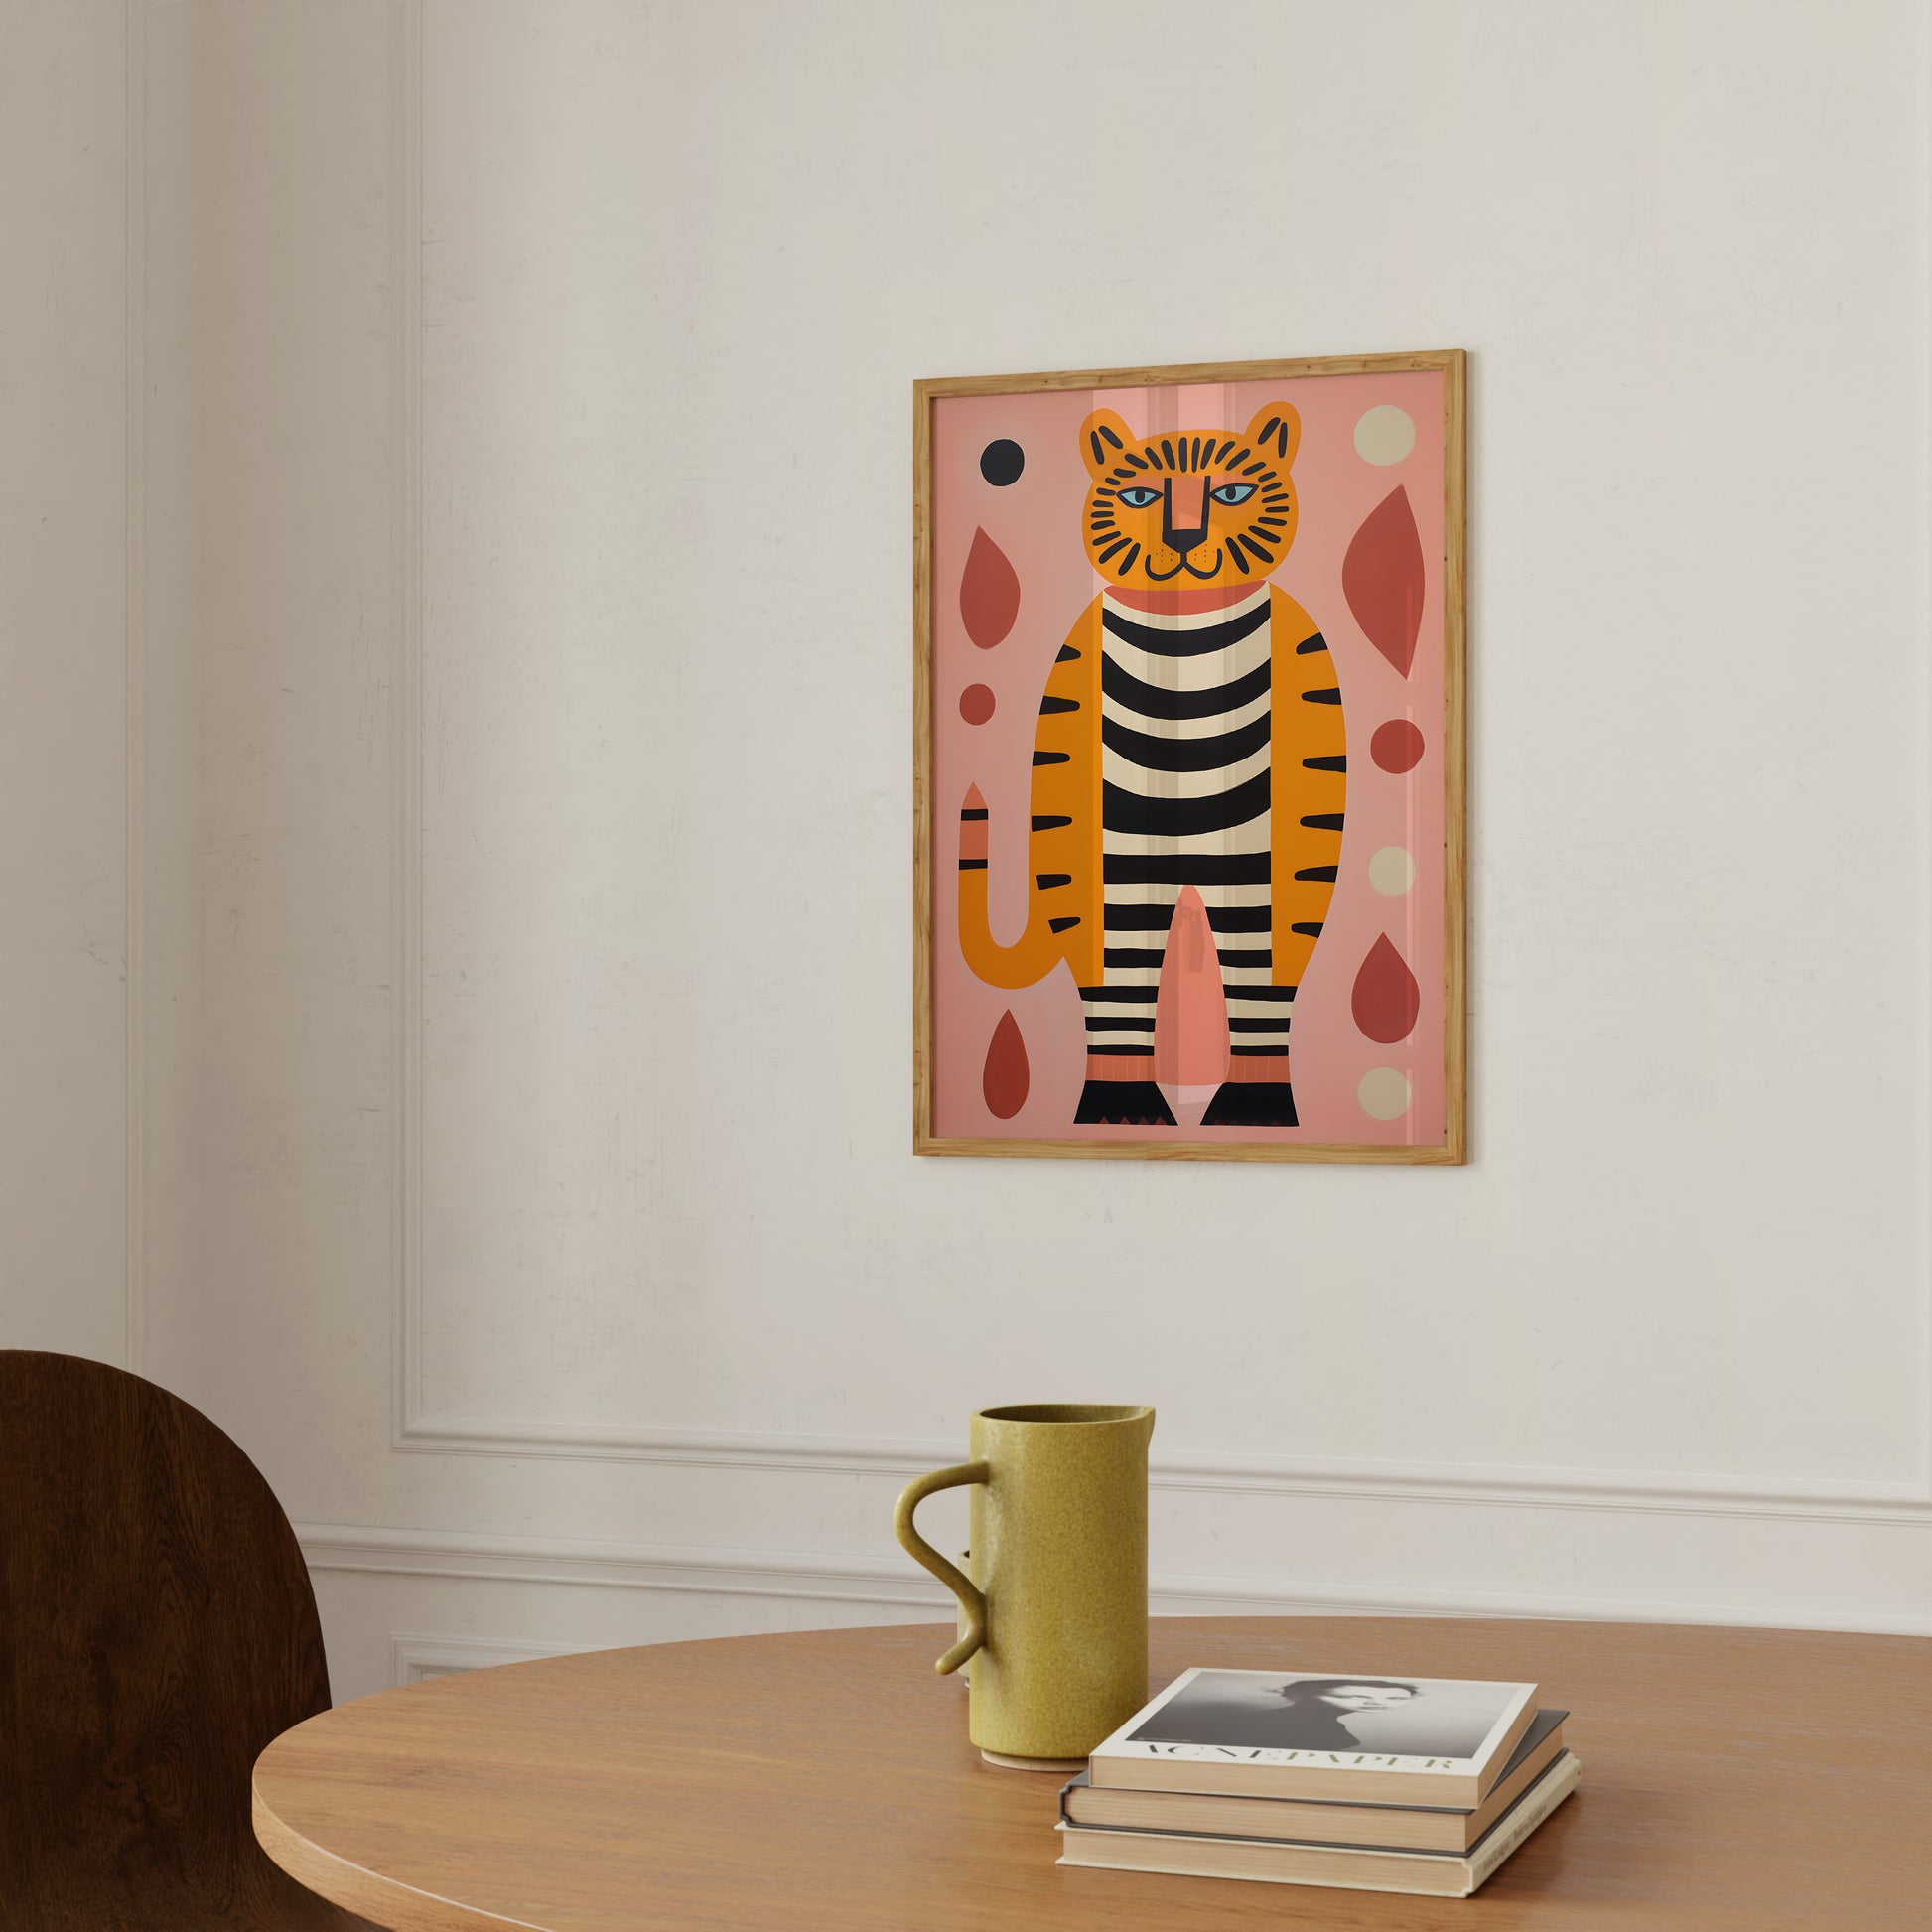 Colorful abstract cat painting on a wall in a cozy room with a mug and books on a table.